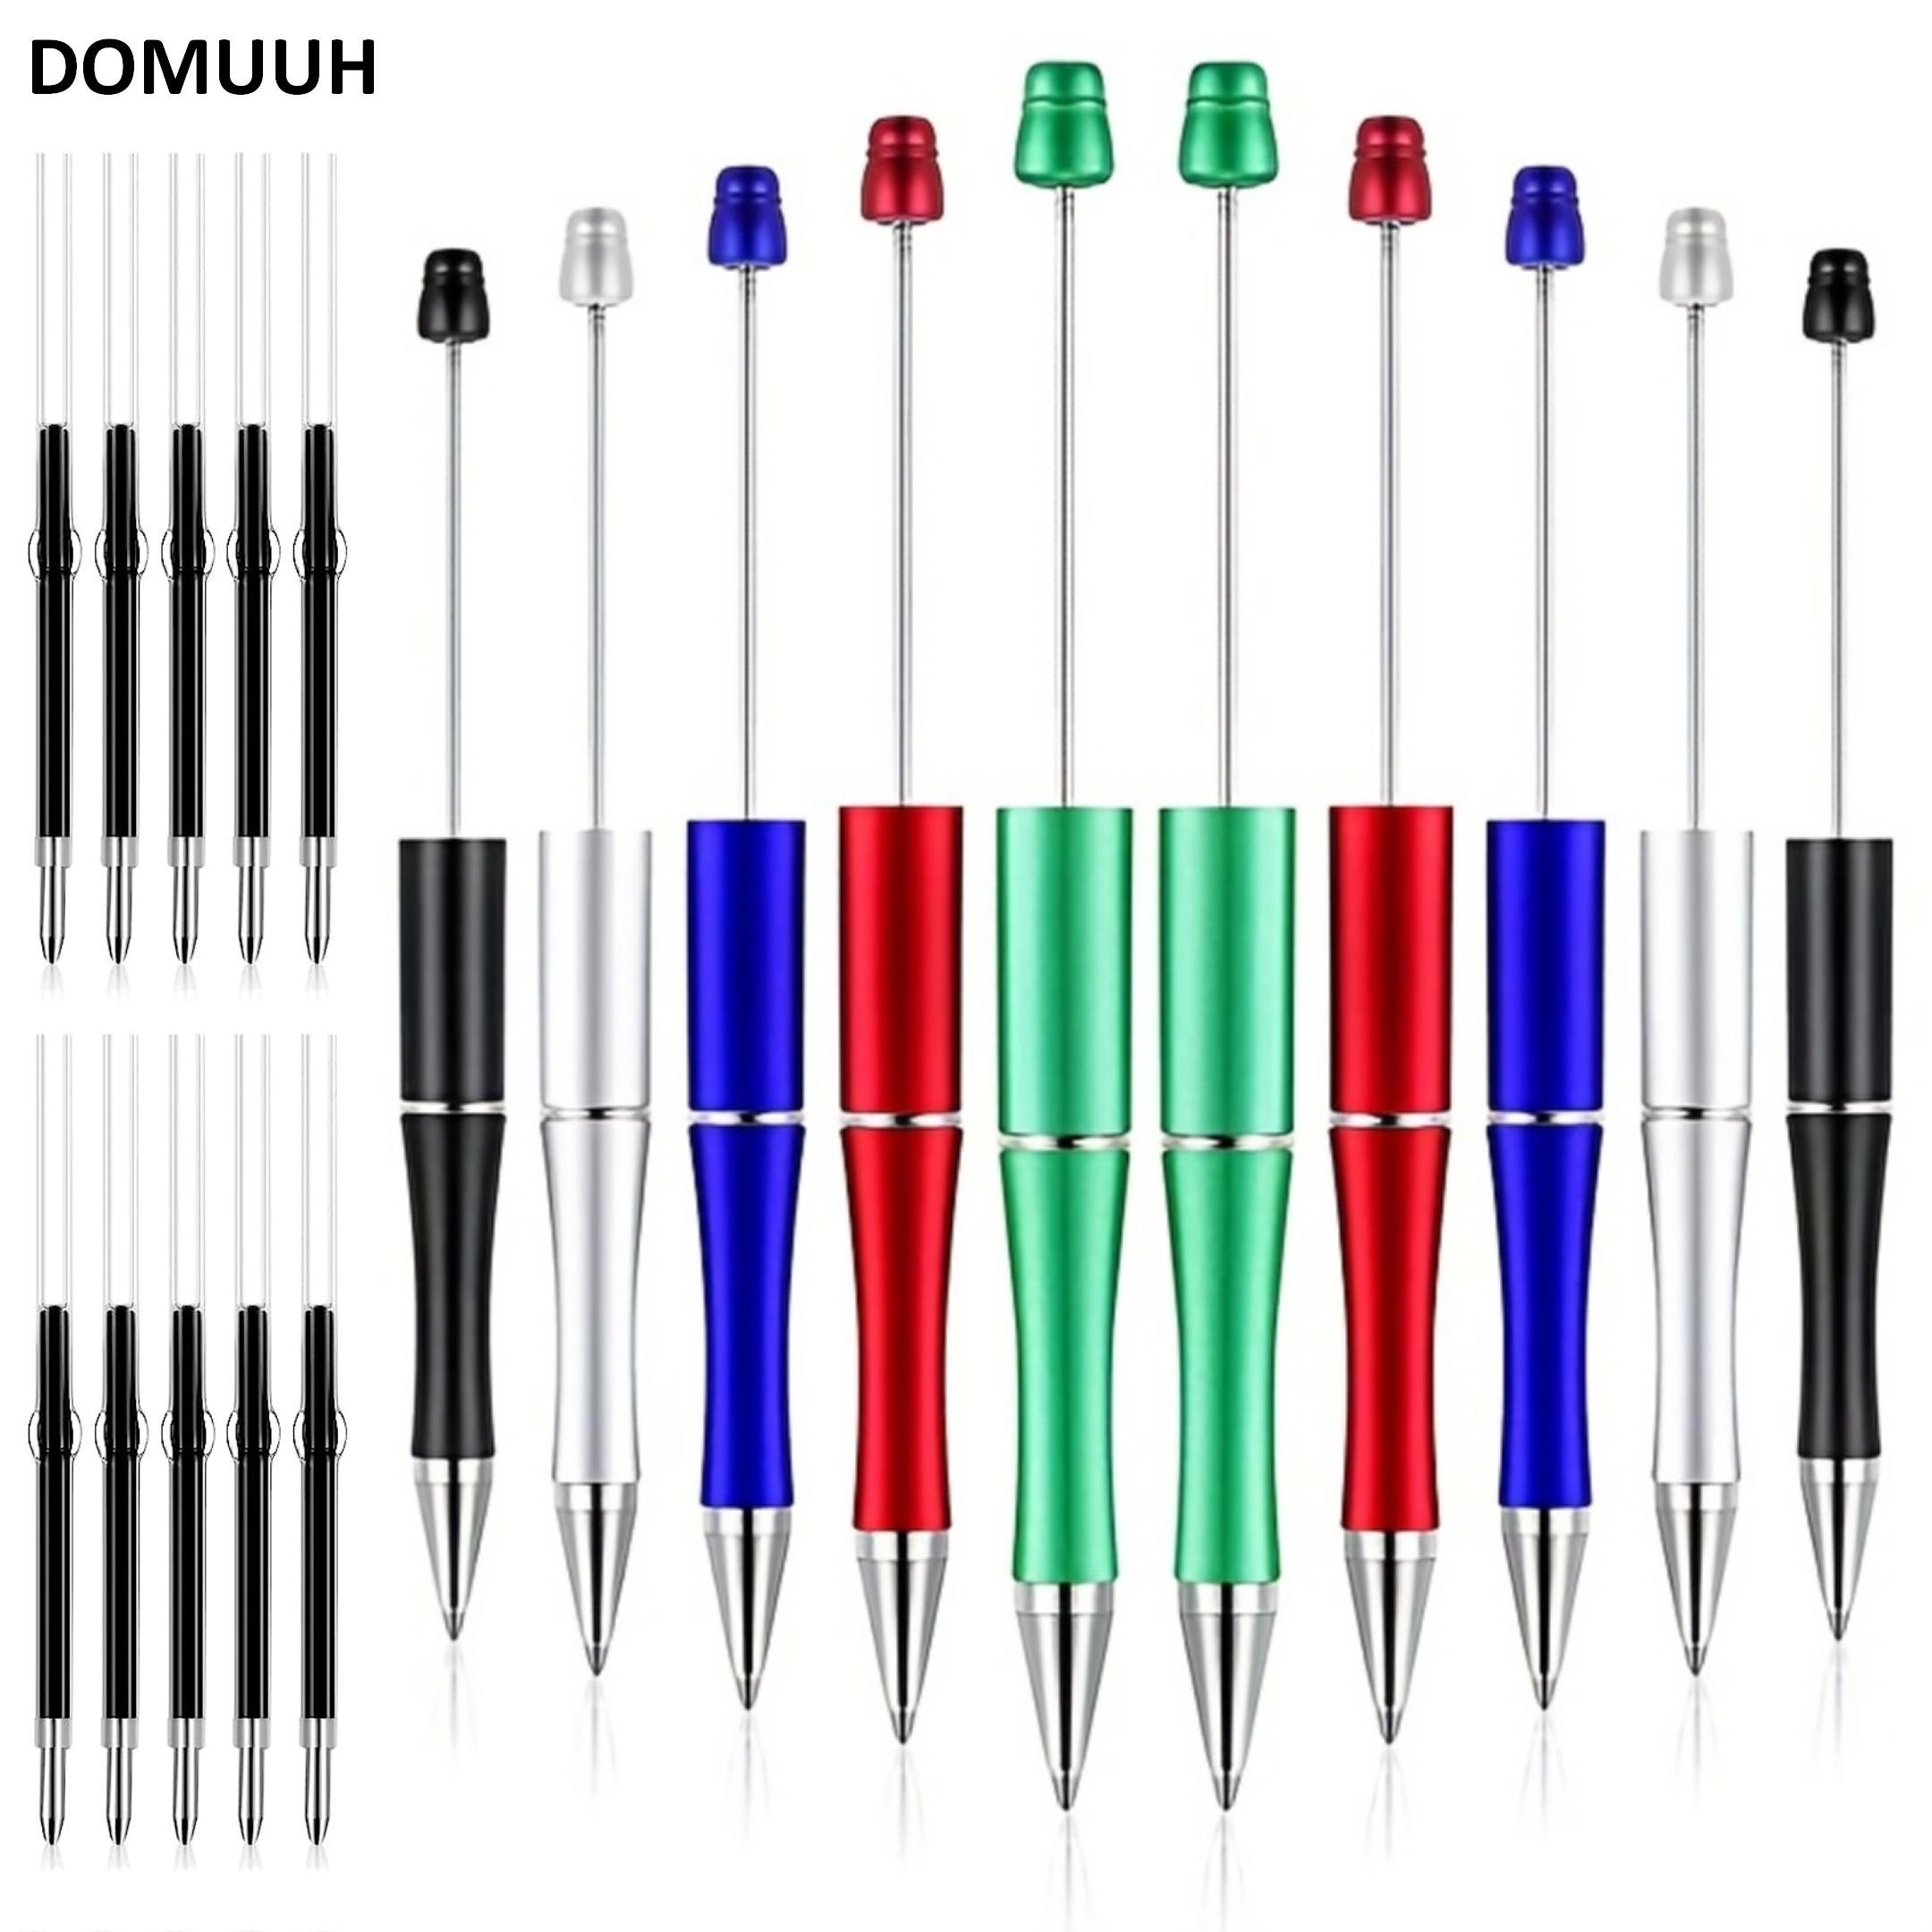 10pcs Beadable Pens, Bead Ballpoint Pen,, Assorted Bead Pens, Shaft Black  Ink Rollerball Pens With Extra Refills For Office School Supplies